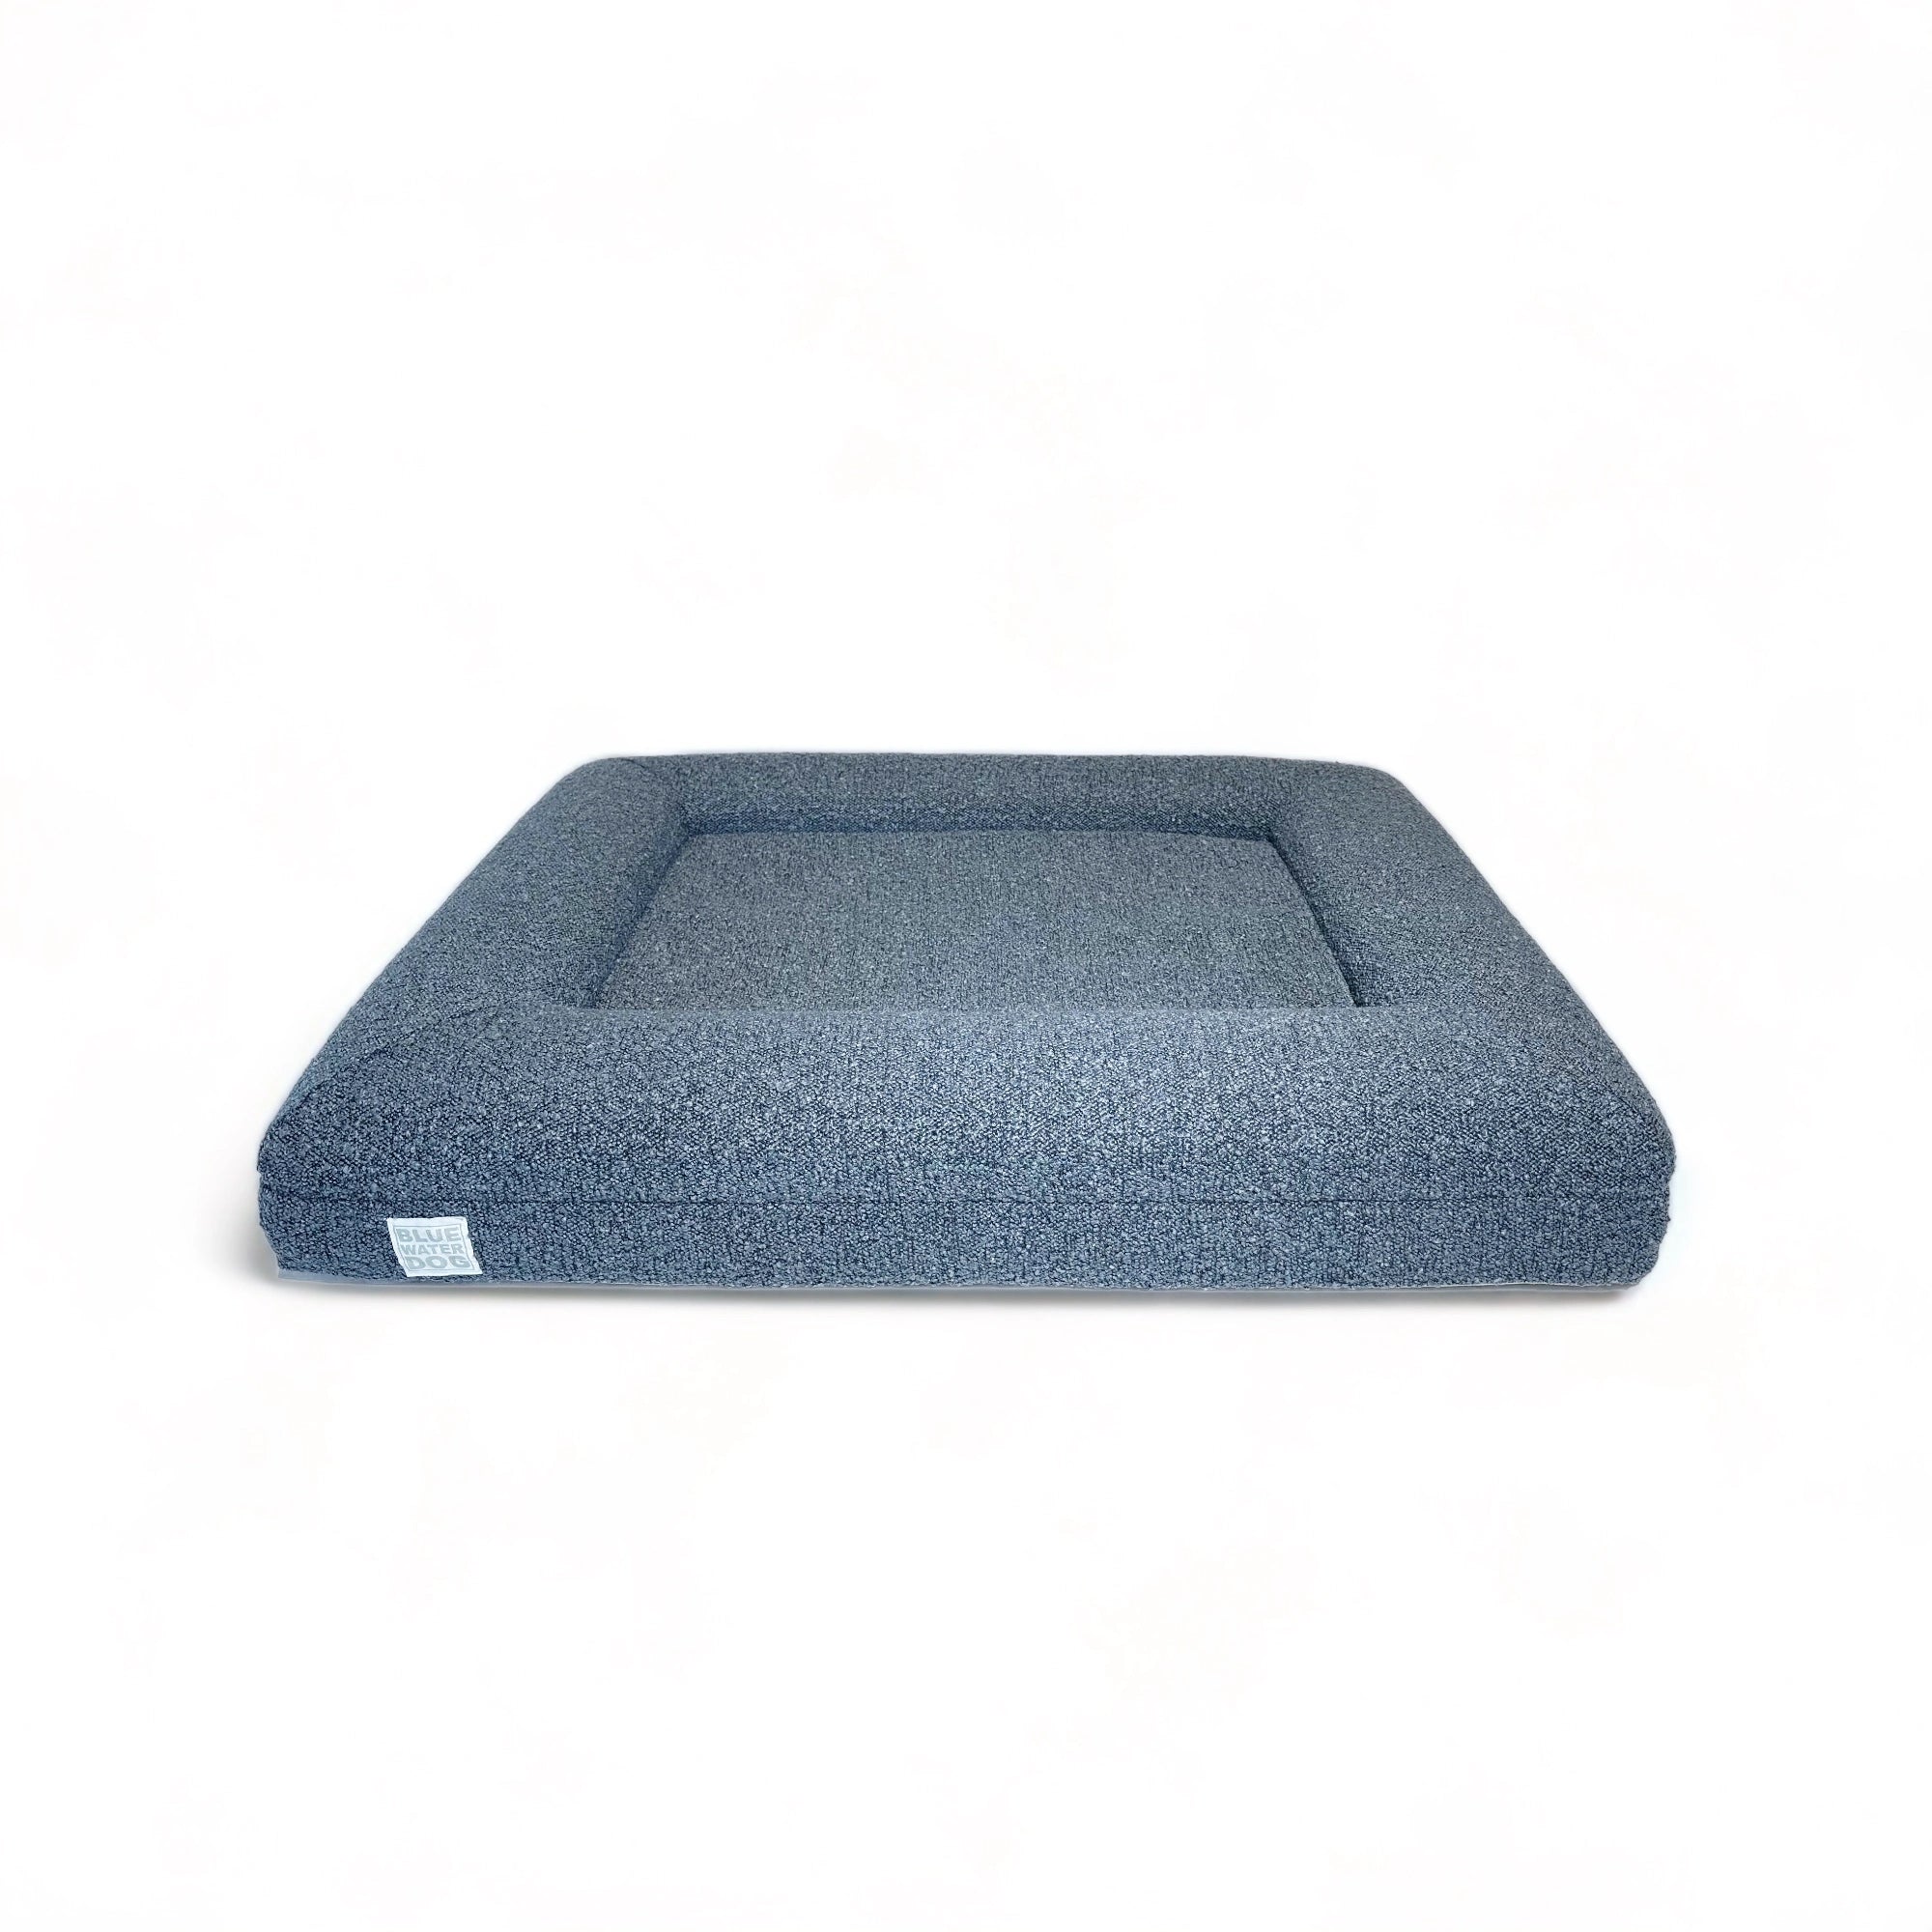 Front of a medium, blue-colored orthopedic memory foam rectangular boucle dog bed with bolsters